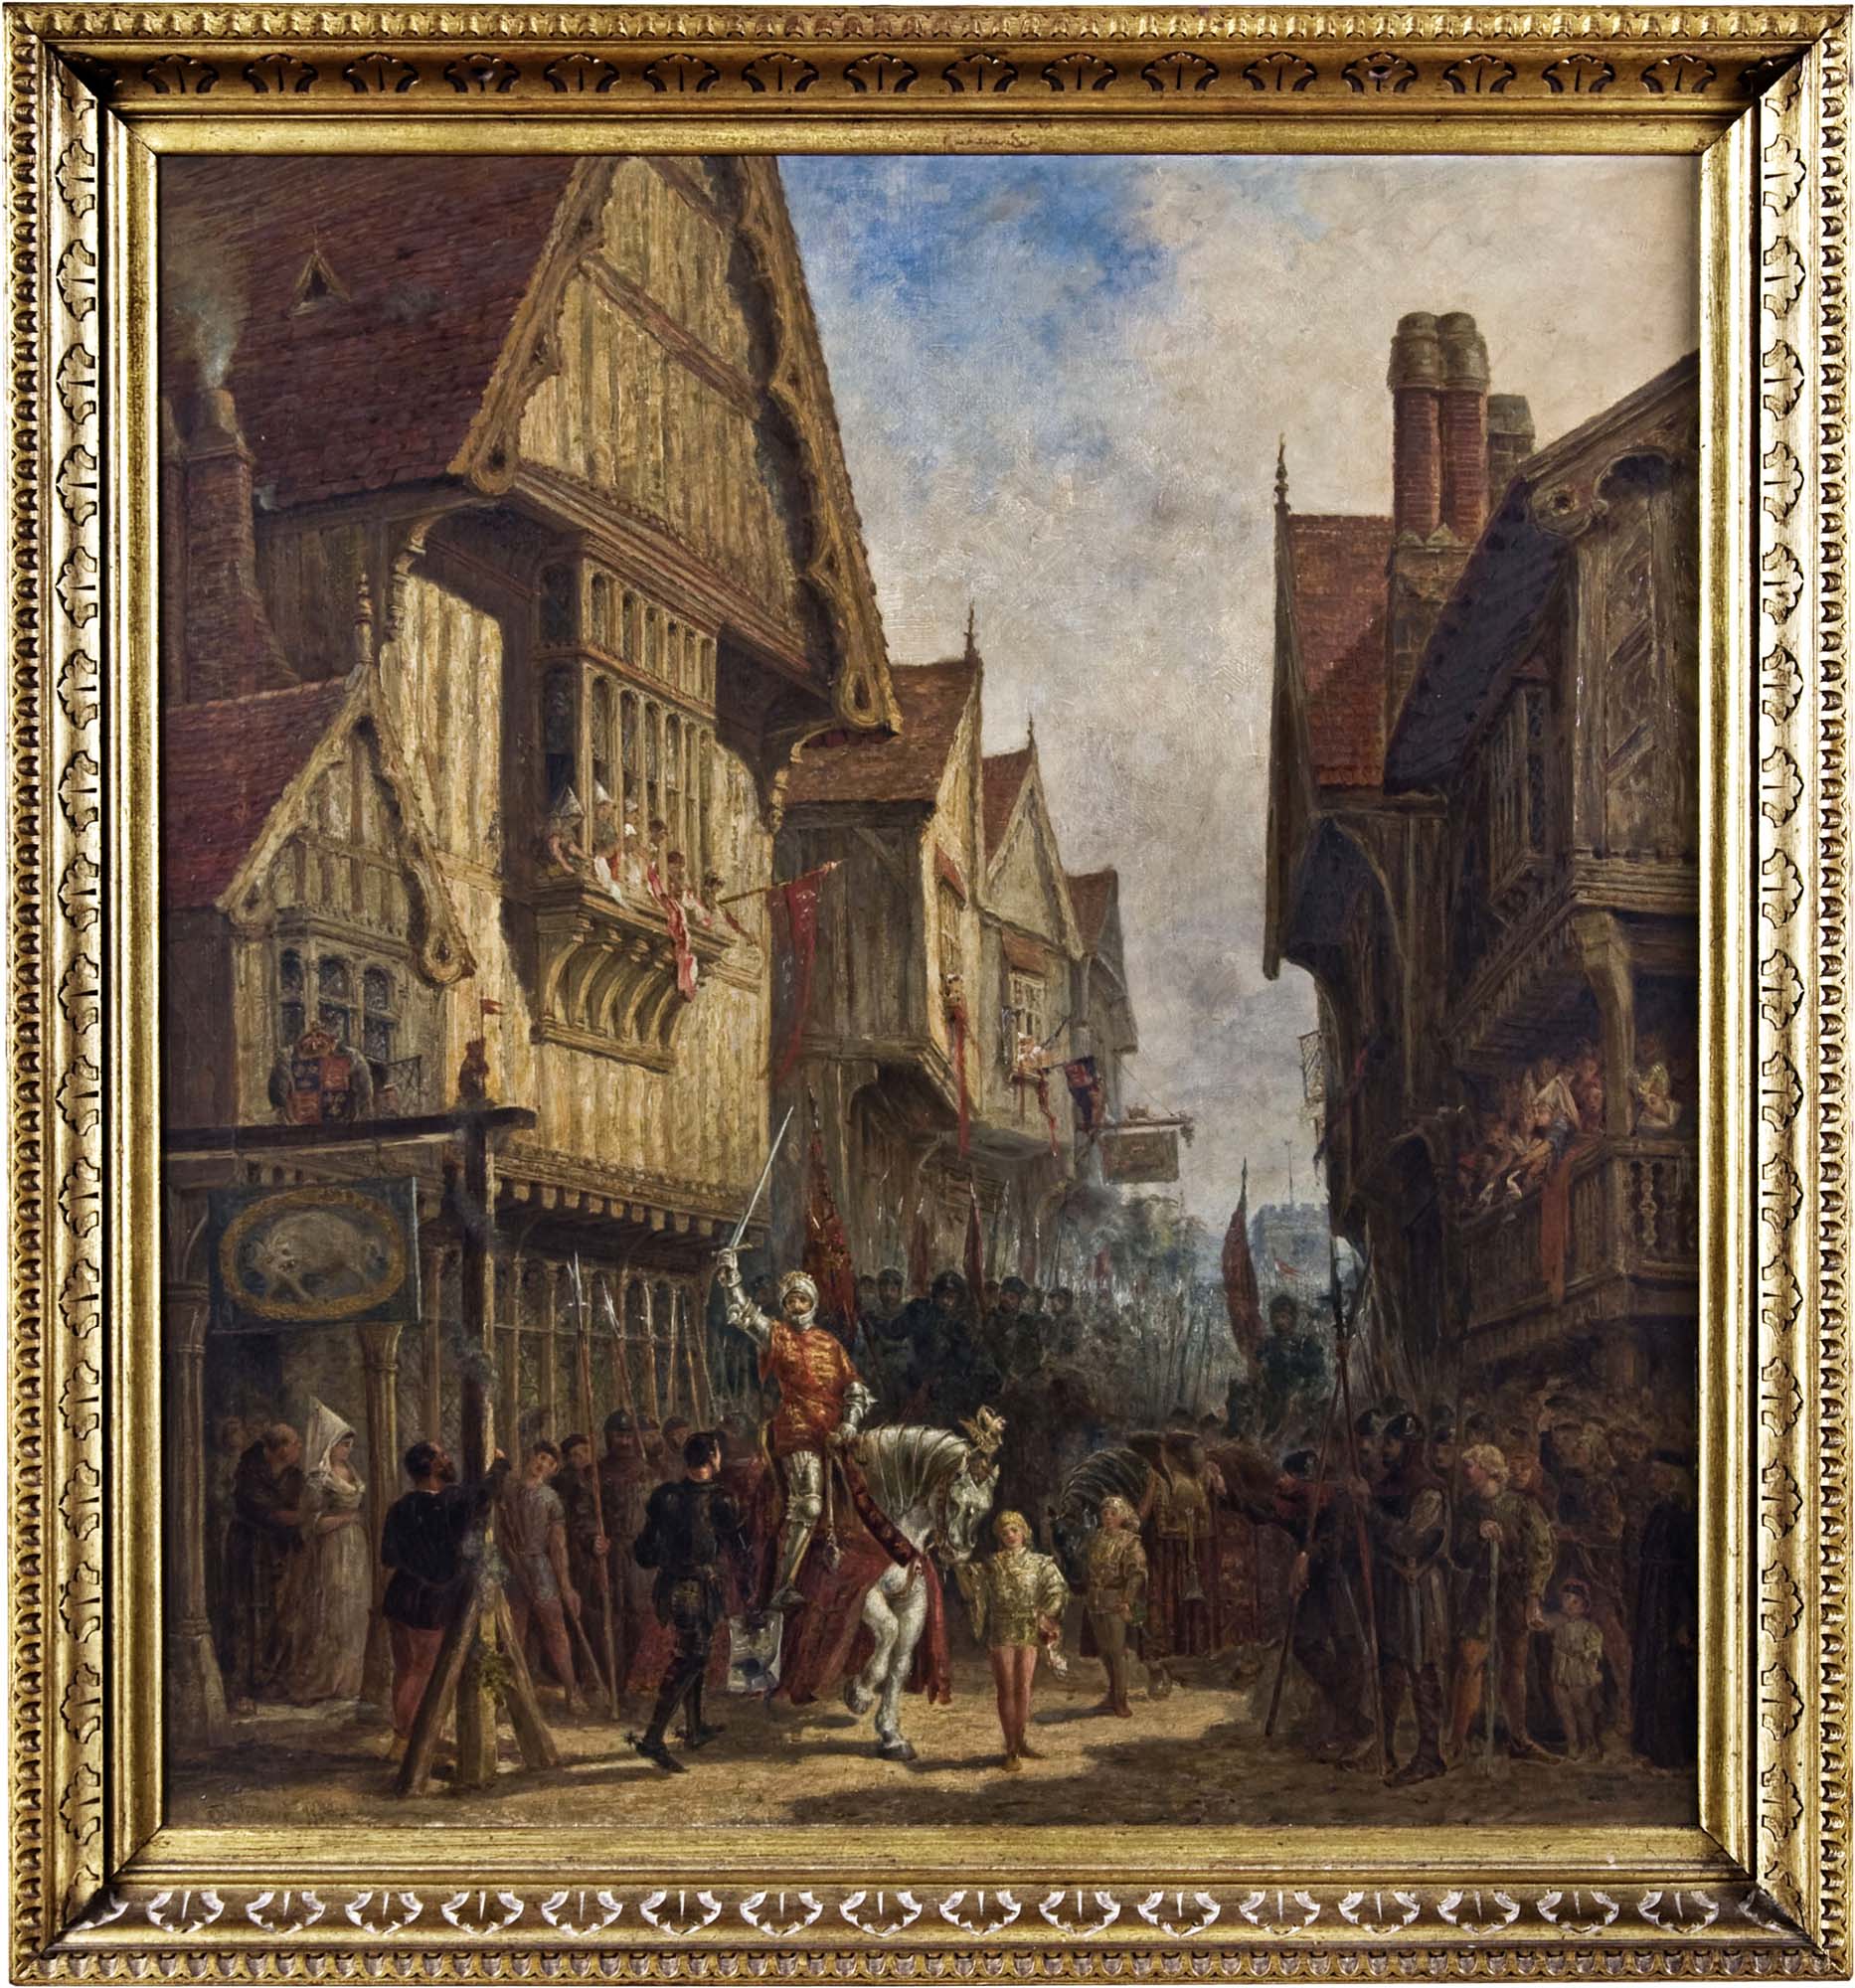 Richard III outside the Blue Boar Inn in Leicester. Oil on canvas, painted by Leicester-born artist John Fulleylove in 1880. - From the collections of Leicester Museums